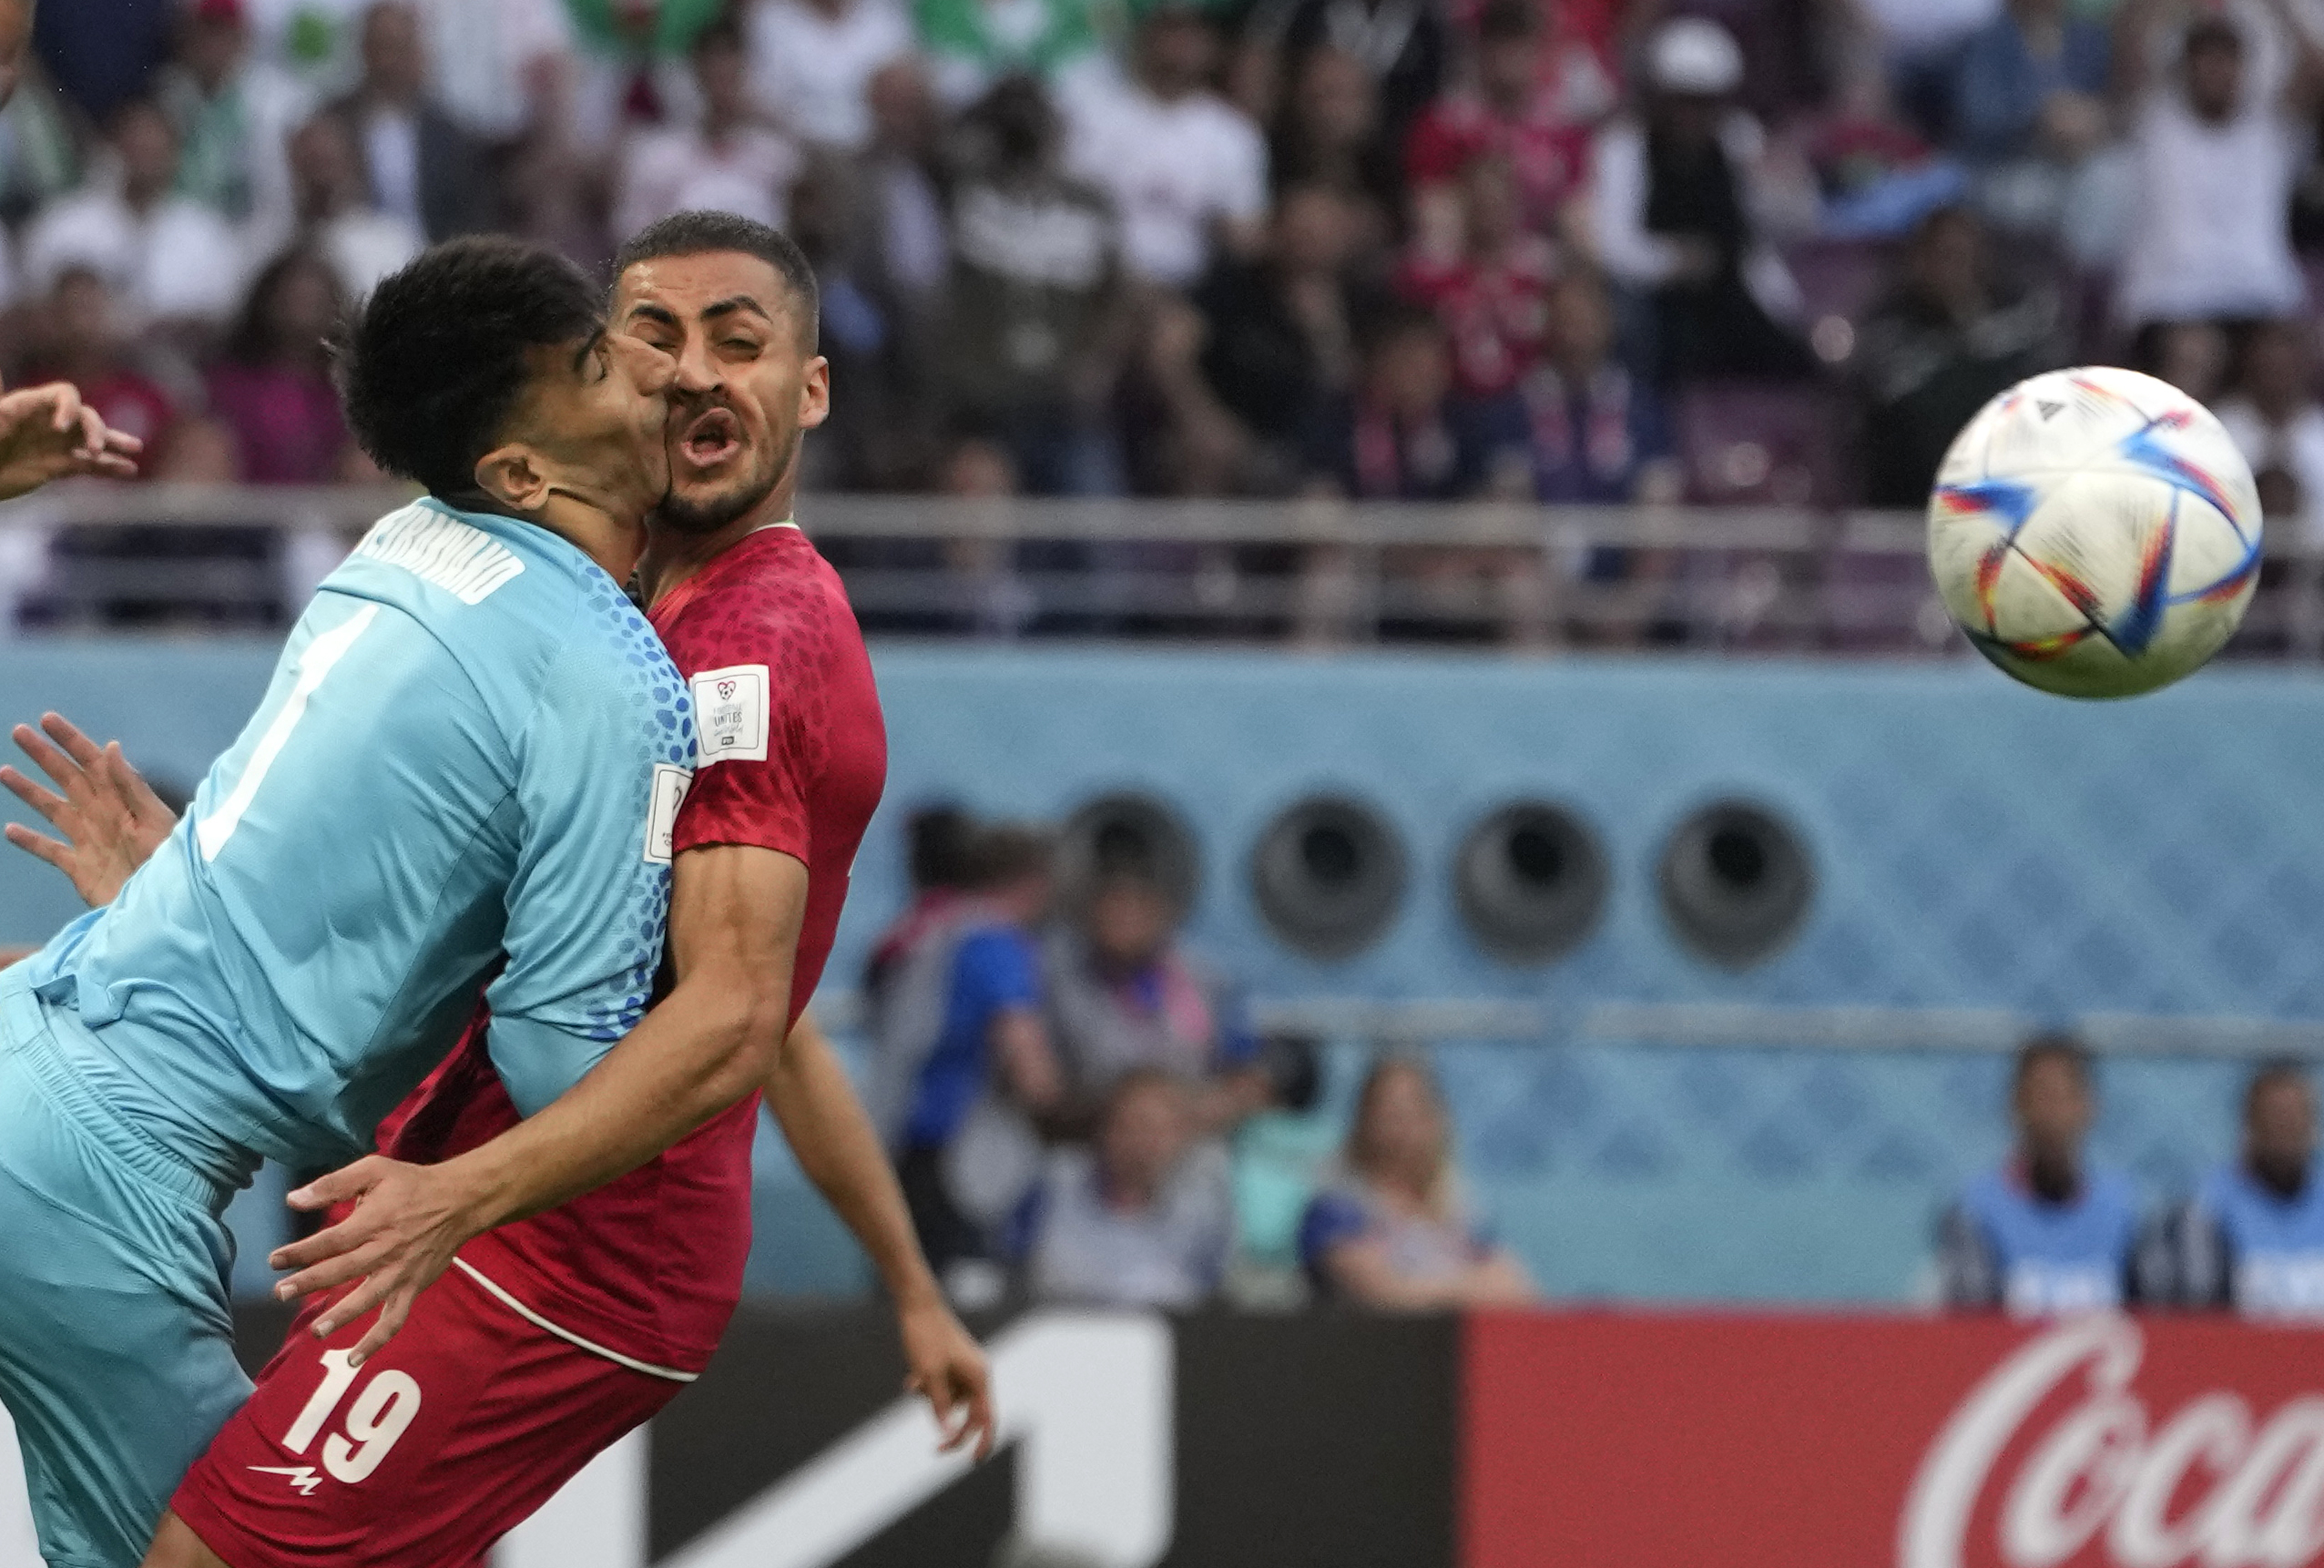 Iran's goalkeeper Alireza Beiranvand collides with teammate Majid Housseini during the World Cup game between Iran and England in Doha, Qatar, on Monday.